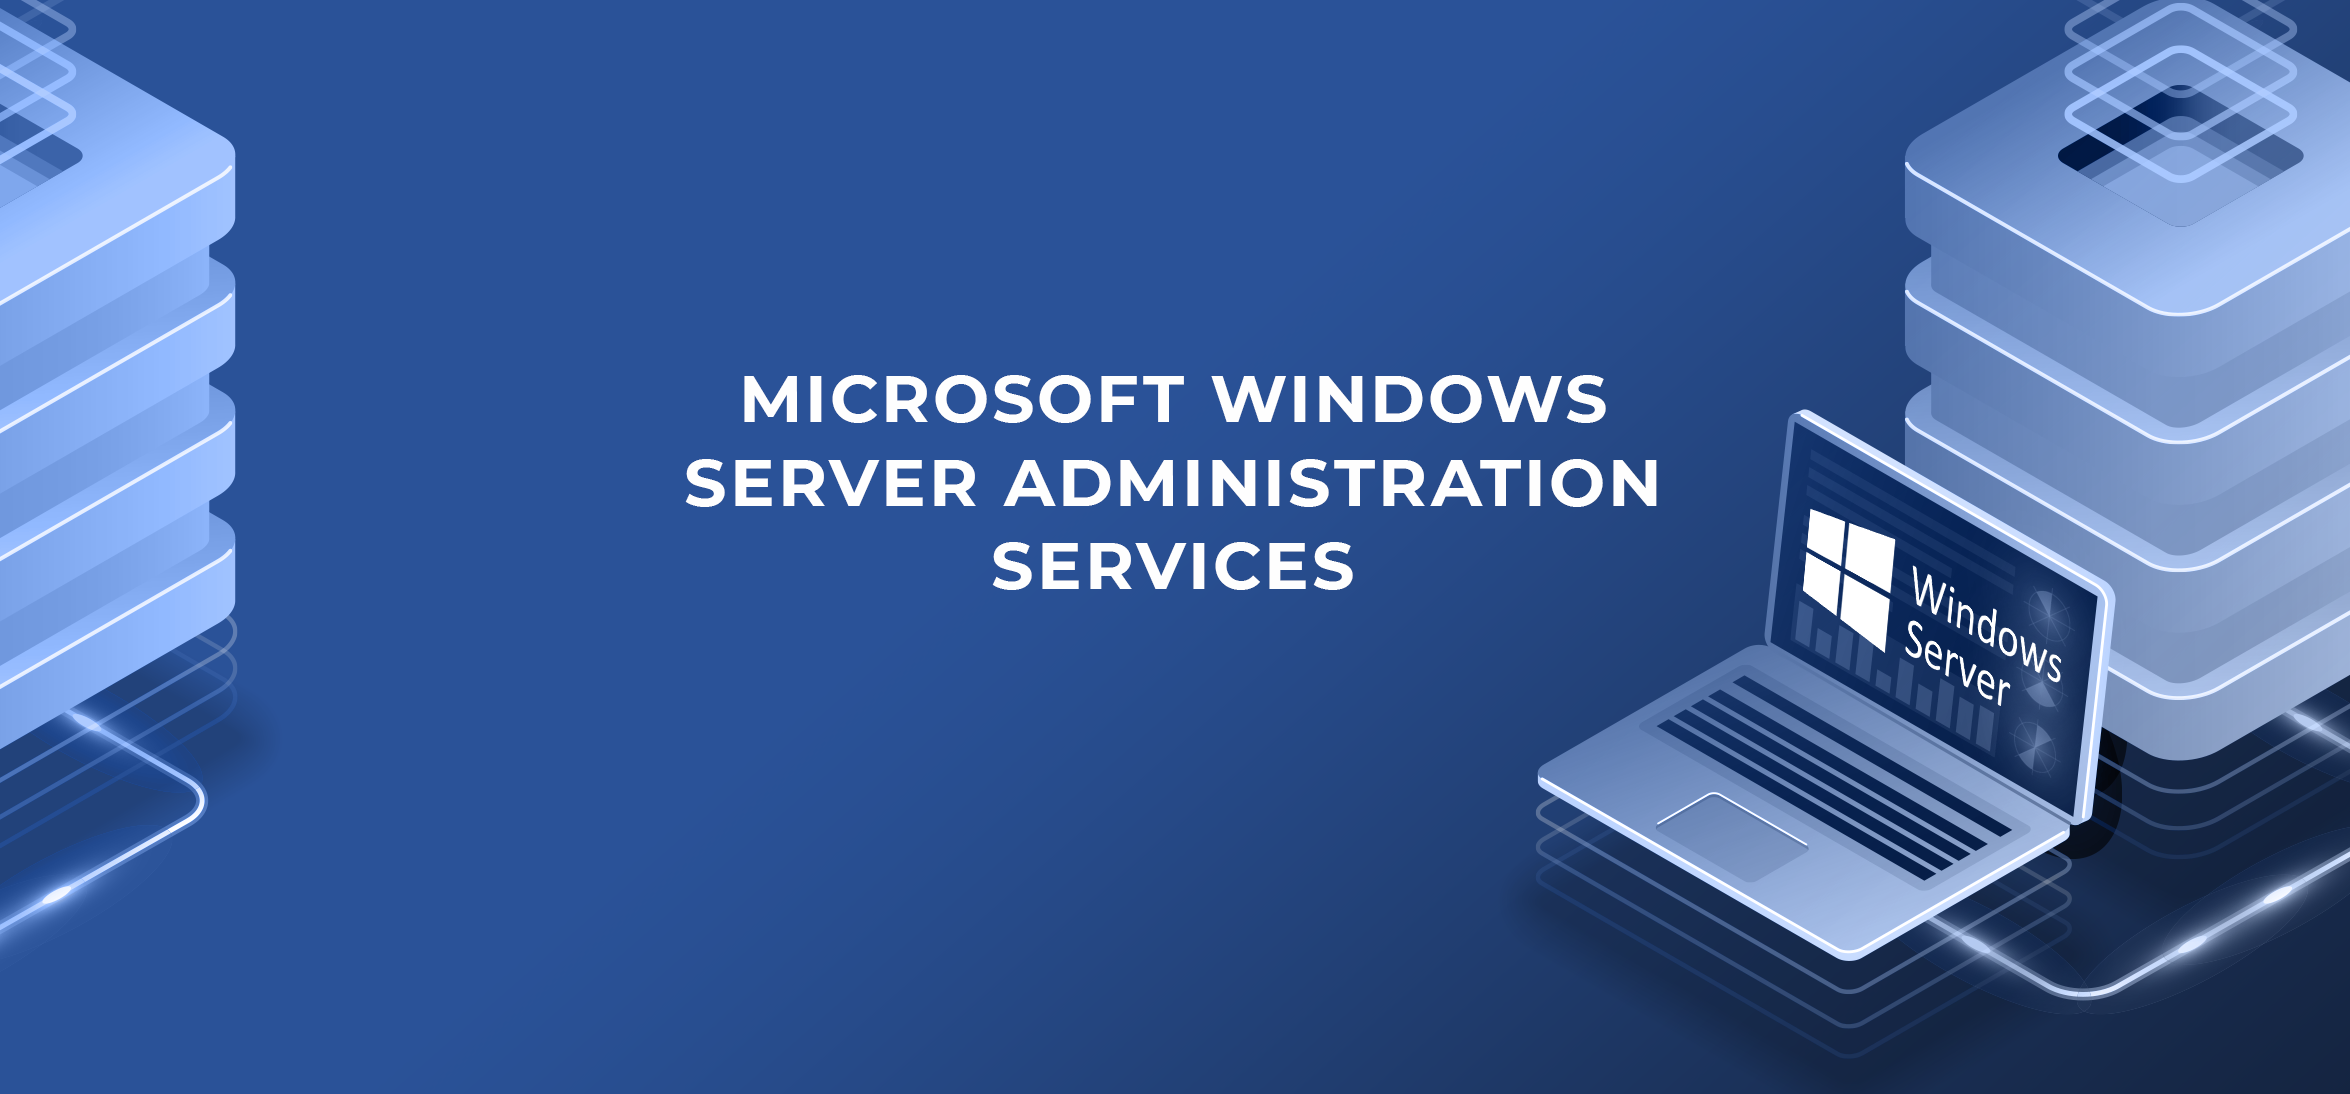 Effective Windows Server Administration and Support Solution Provider in El Cajon CA, 92019